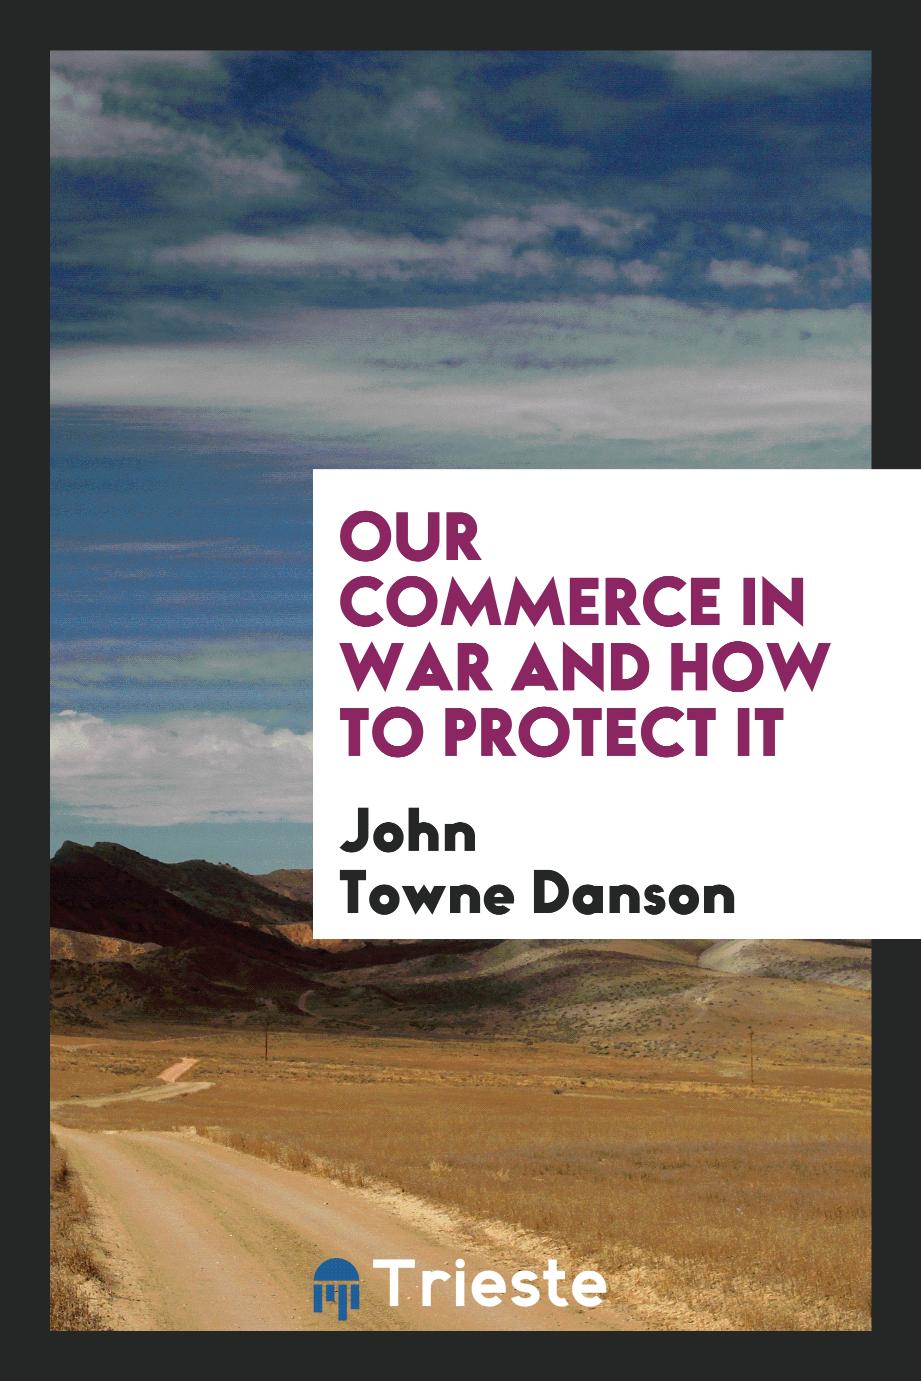 Our Commerce in War and How to Protect It